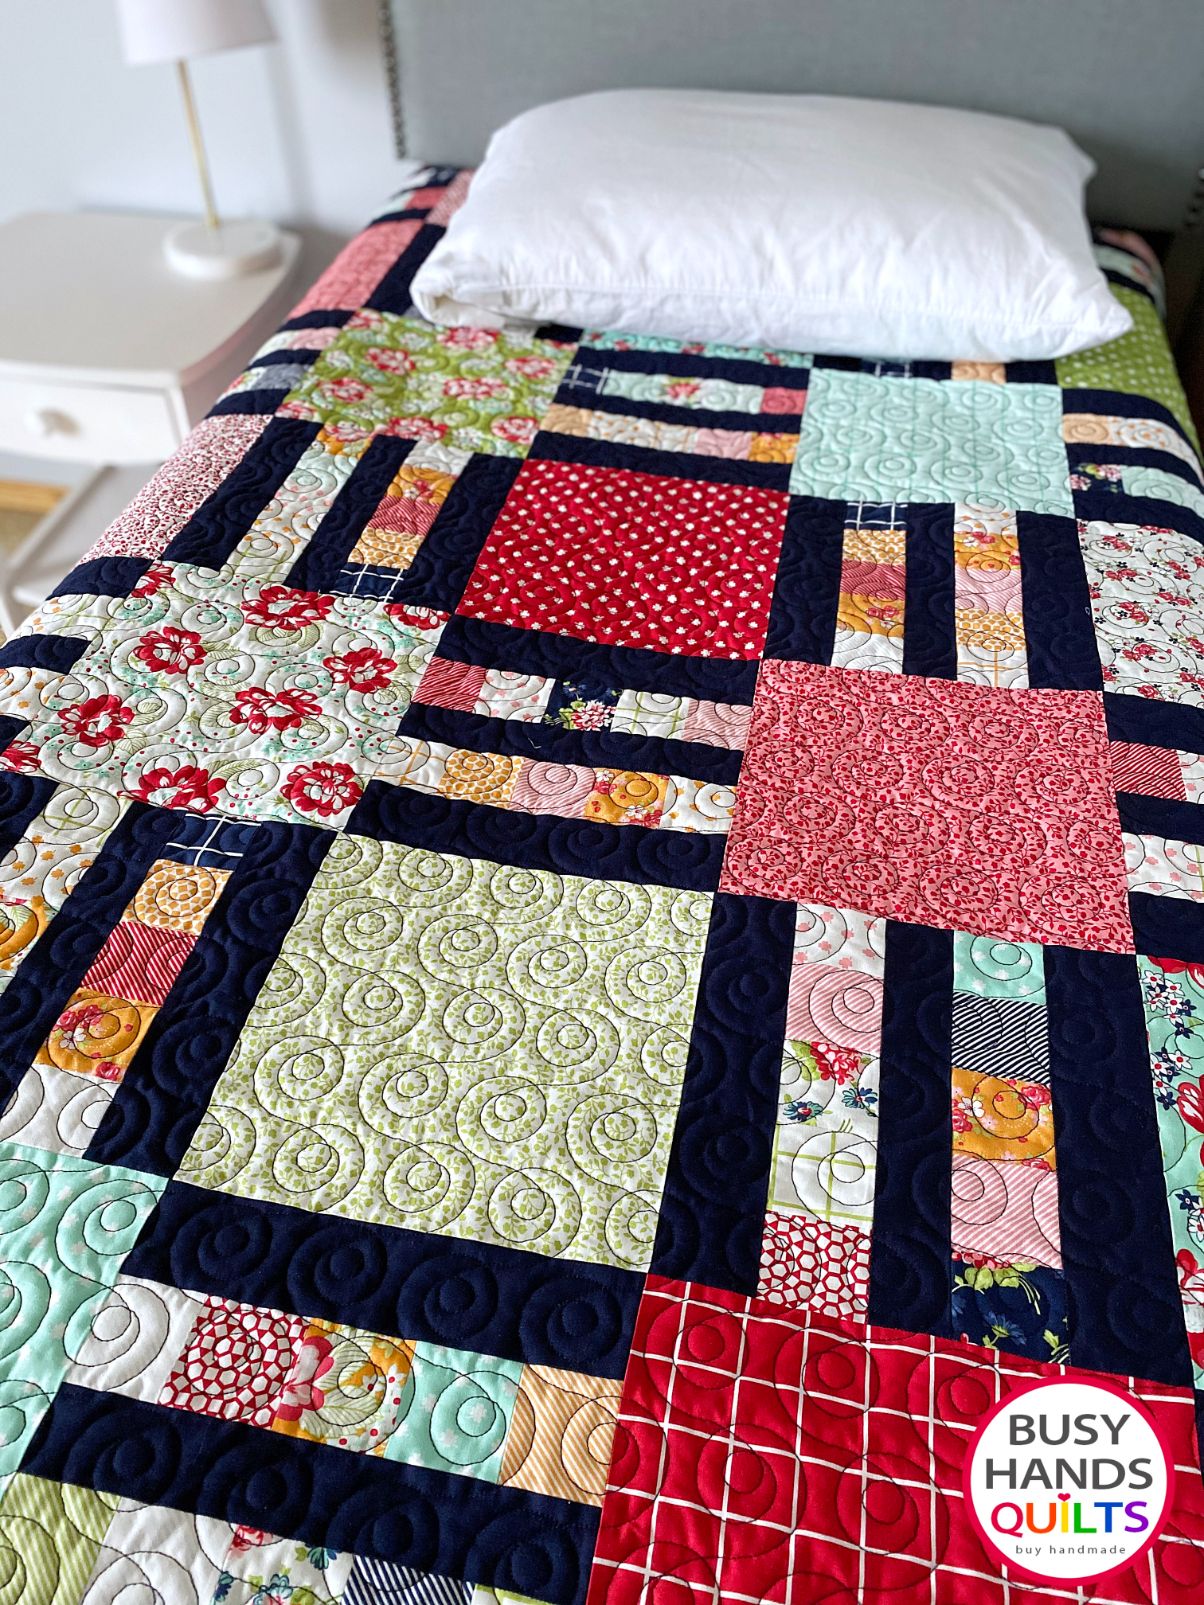 Handmade Picket Fence Square Throw Quilt in One Fine Day Busy Hands Quilts $349